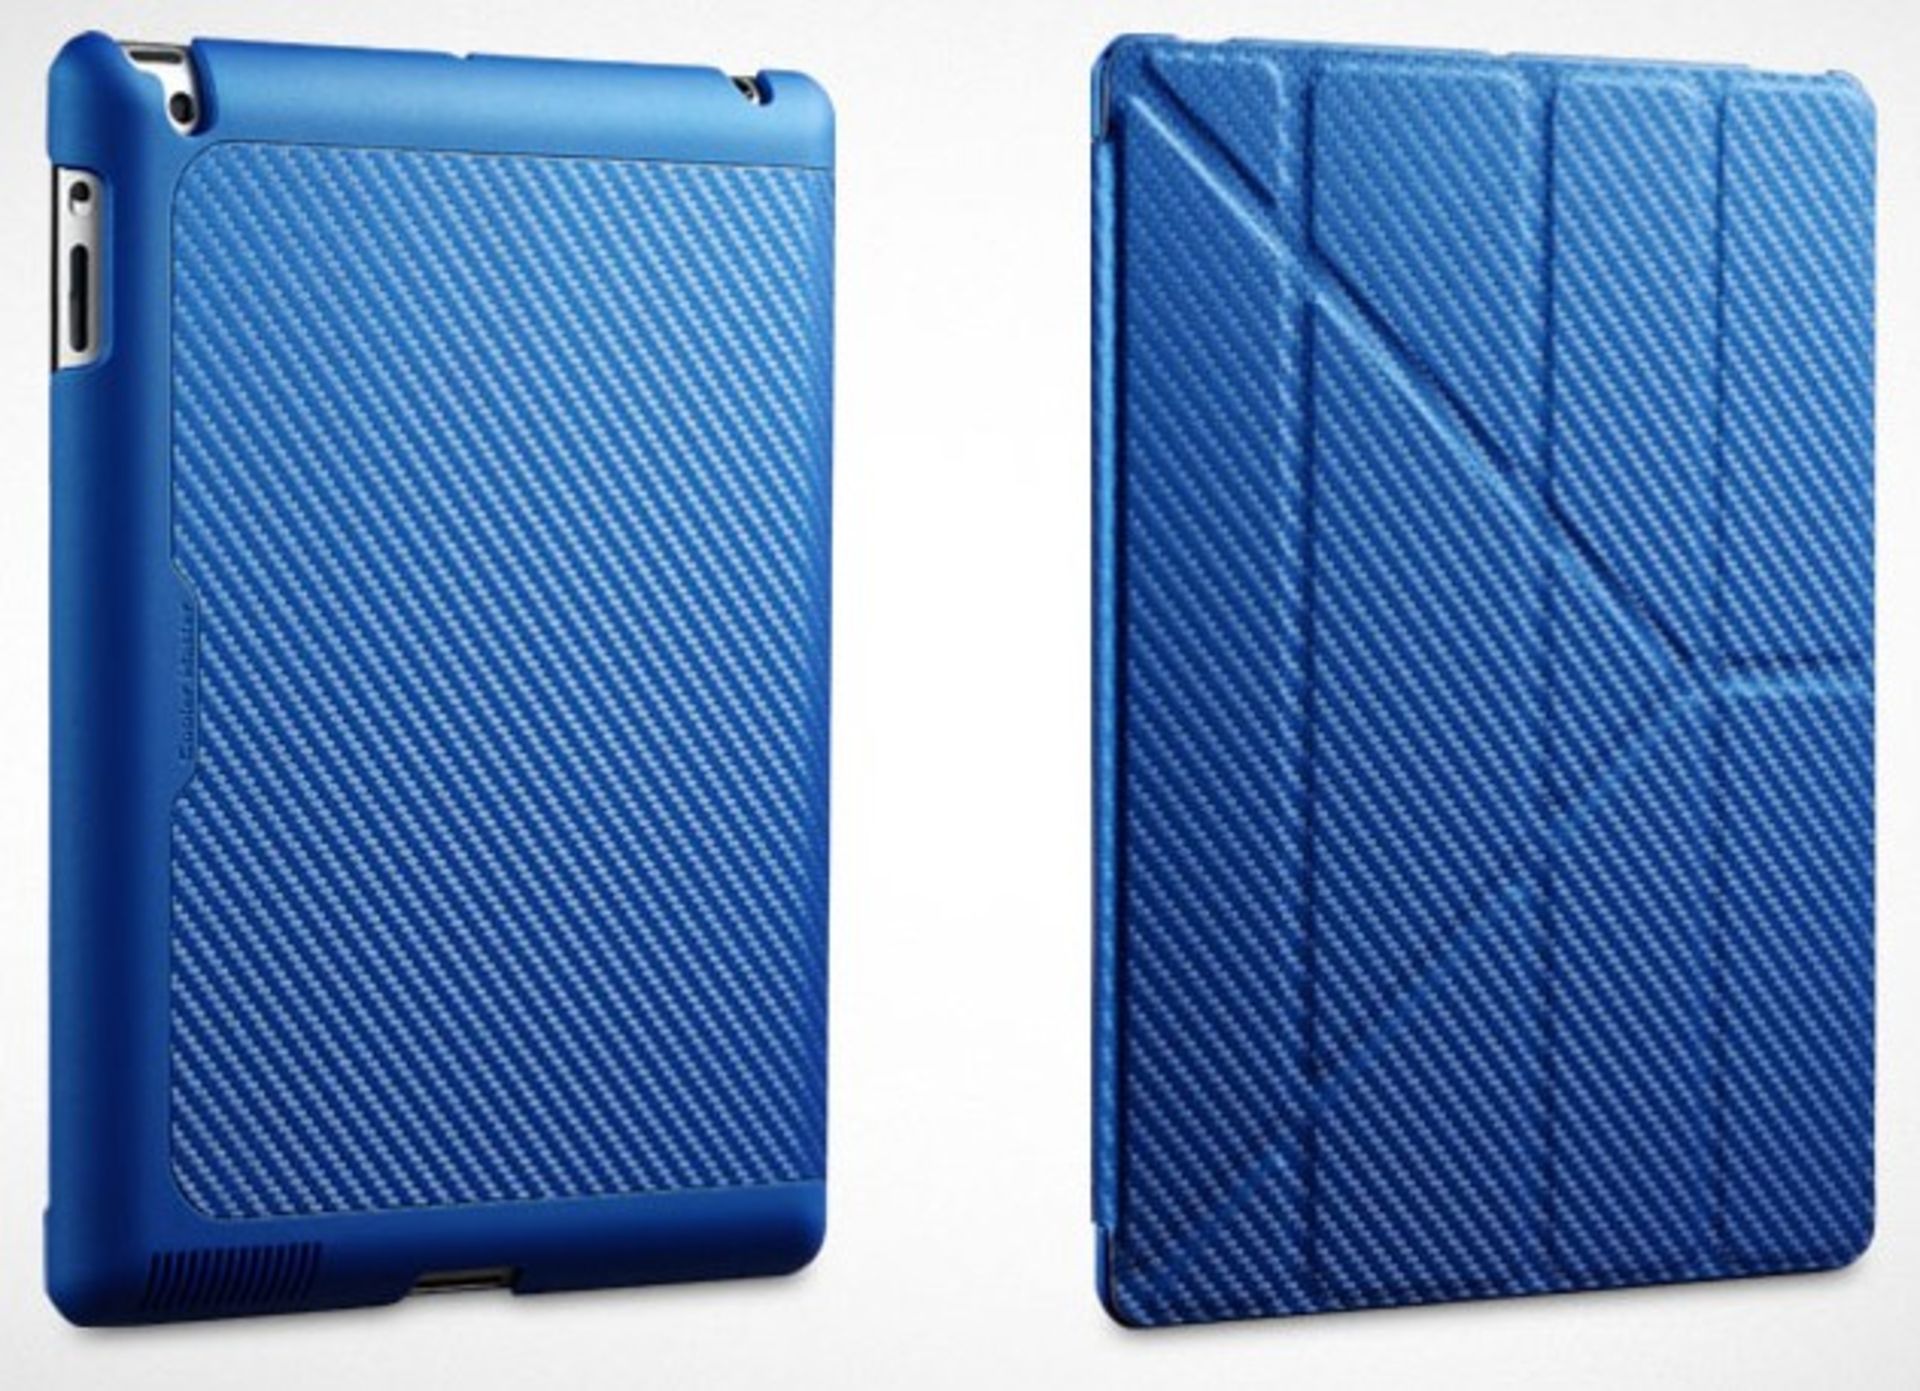 V Brand New Cooler Master Yen Folio Carbon Texture Ipad Sleeve - Four Available Viewing Angles - For